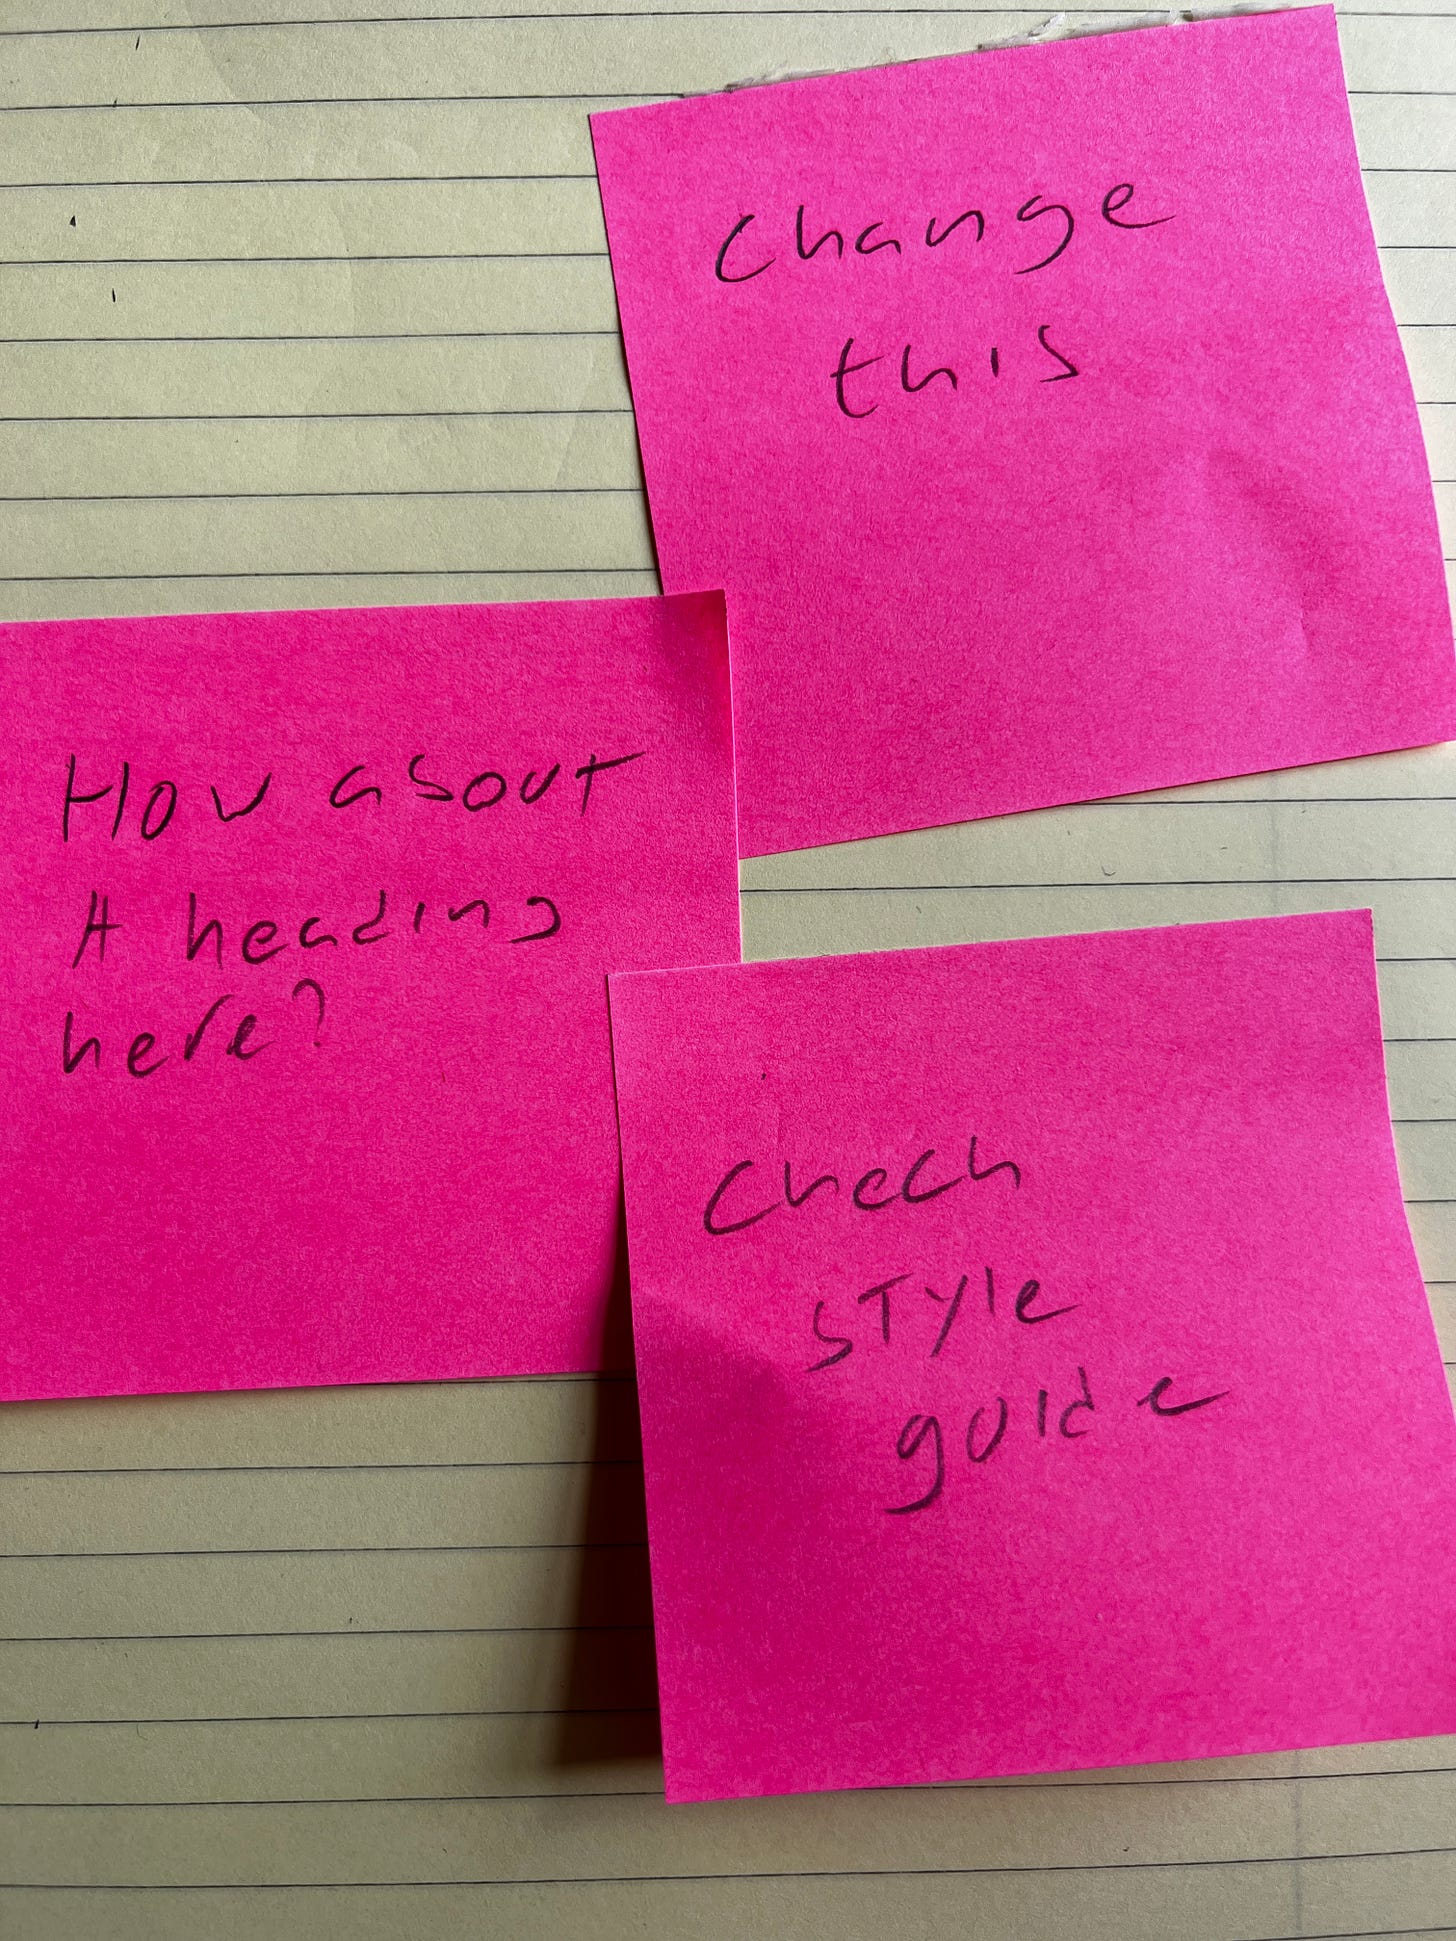 post-its with suggestions written on them